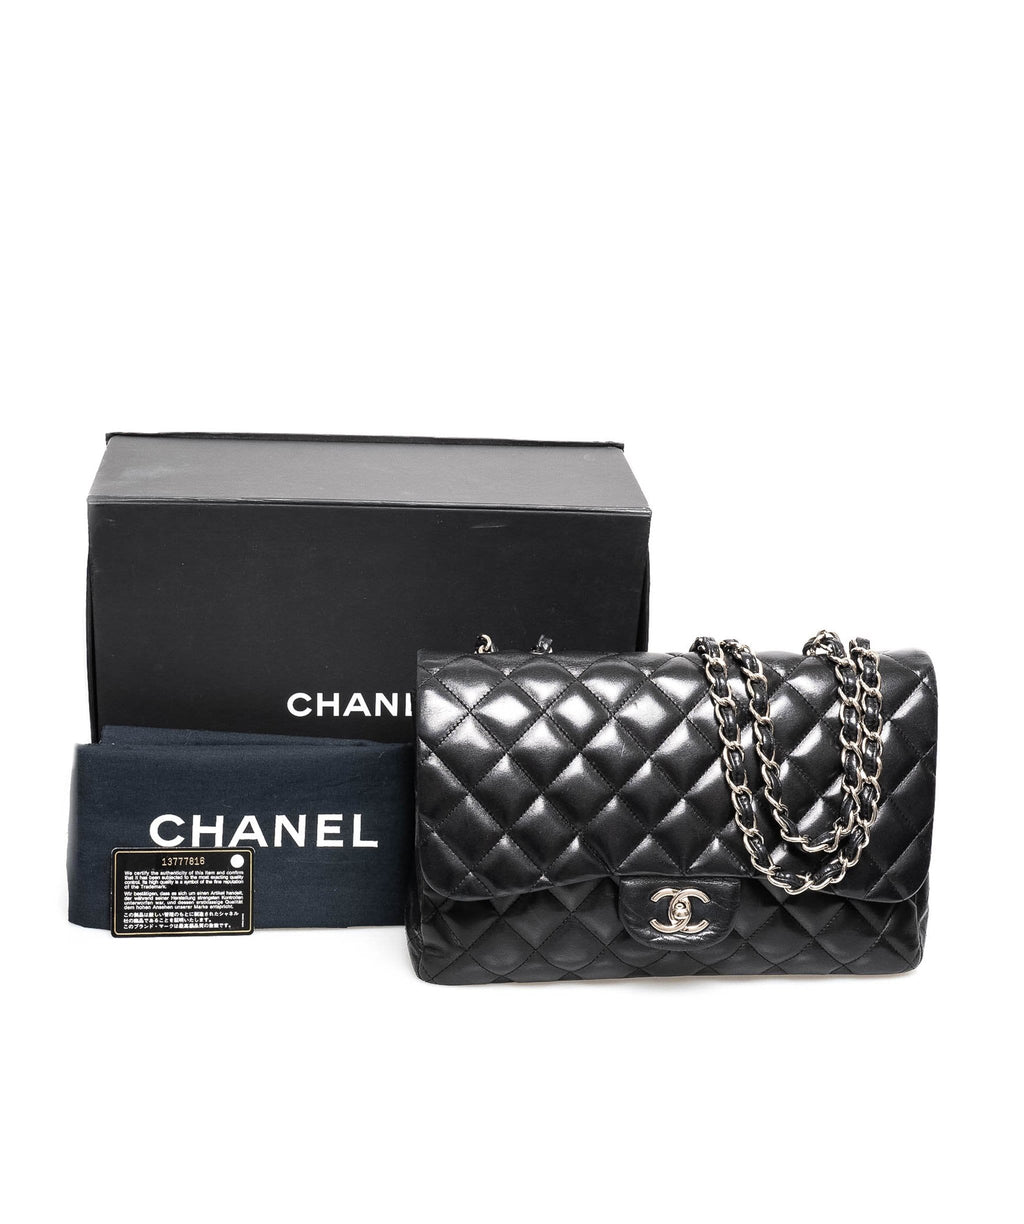 CHANEL CLASSIC WALLET ON CHAIN SILVER-TONE HARDWARE